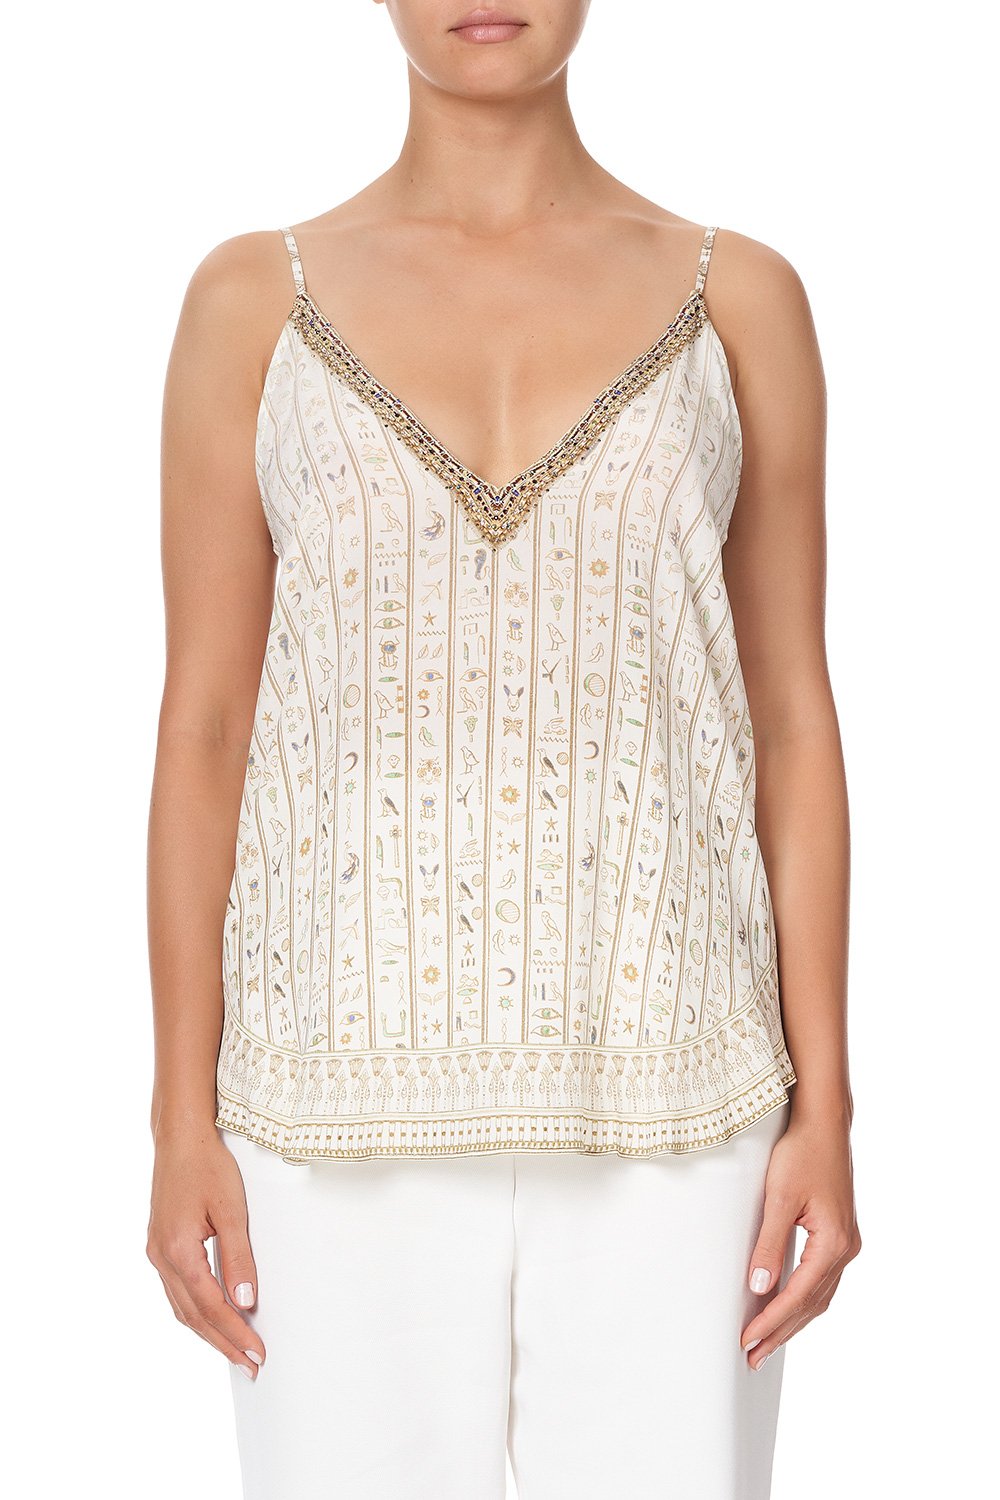 V NECK CAMI THE QUEENS CHAMBER